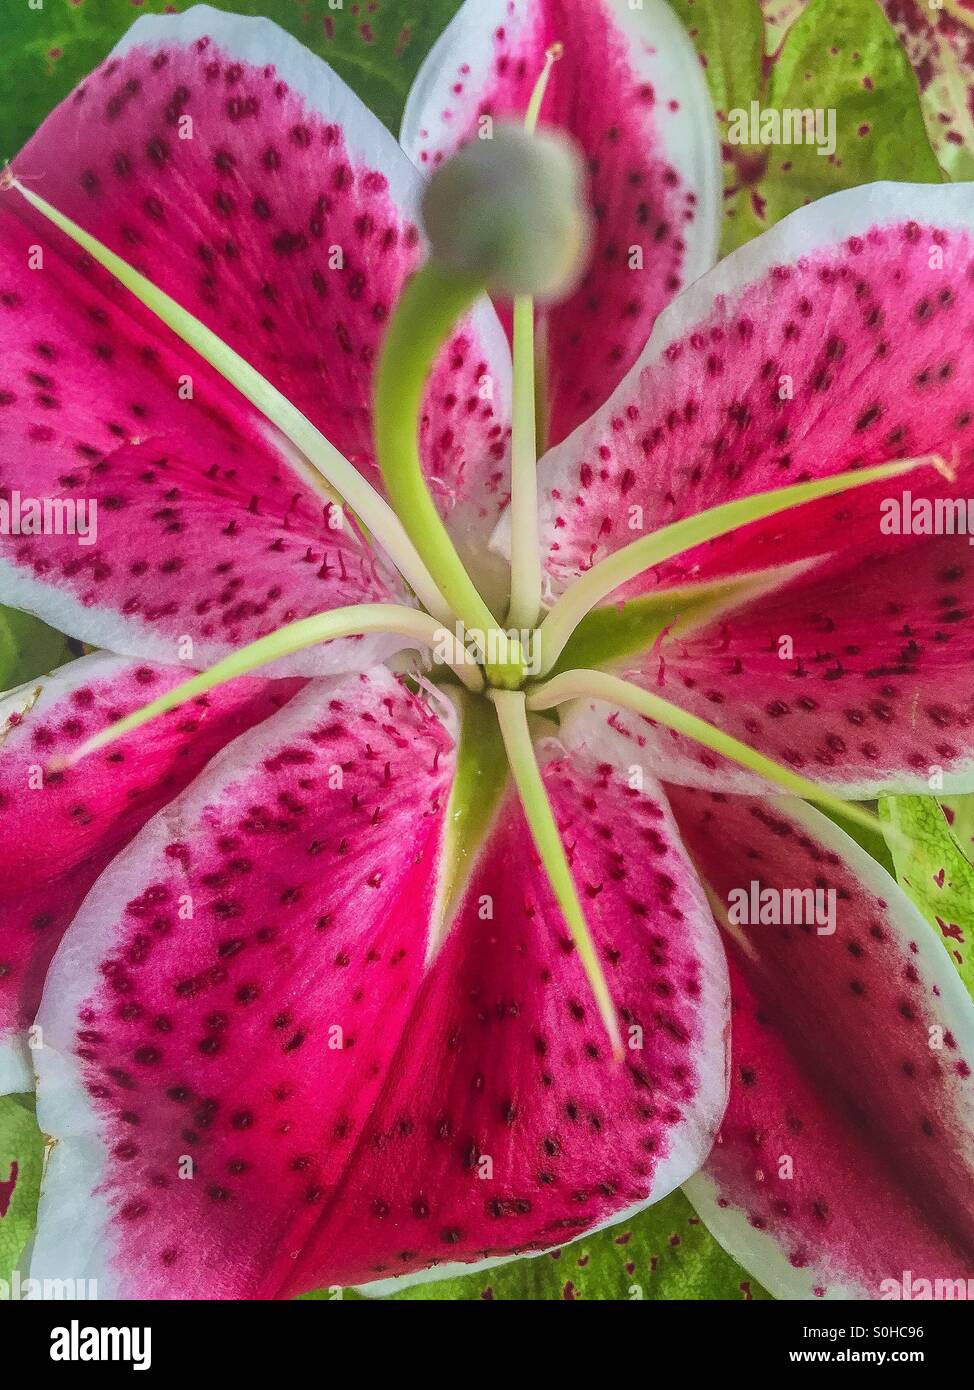 Lily flower with stamen. Stock Photo